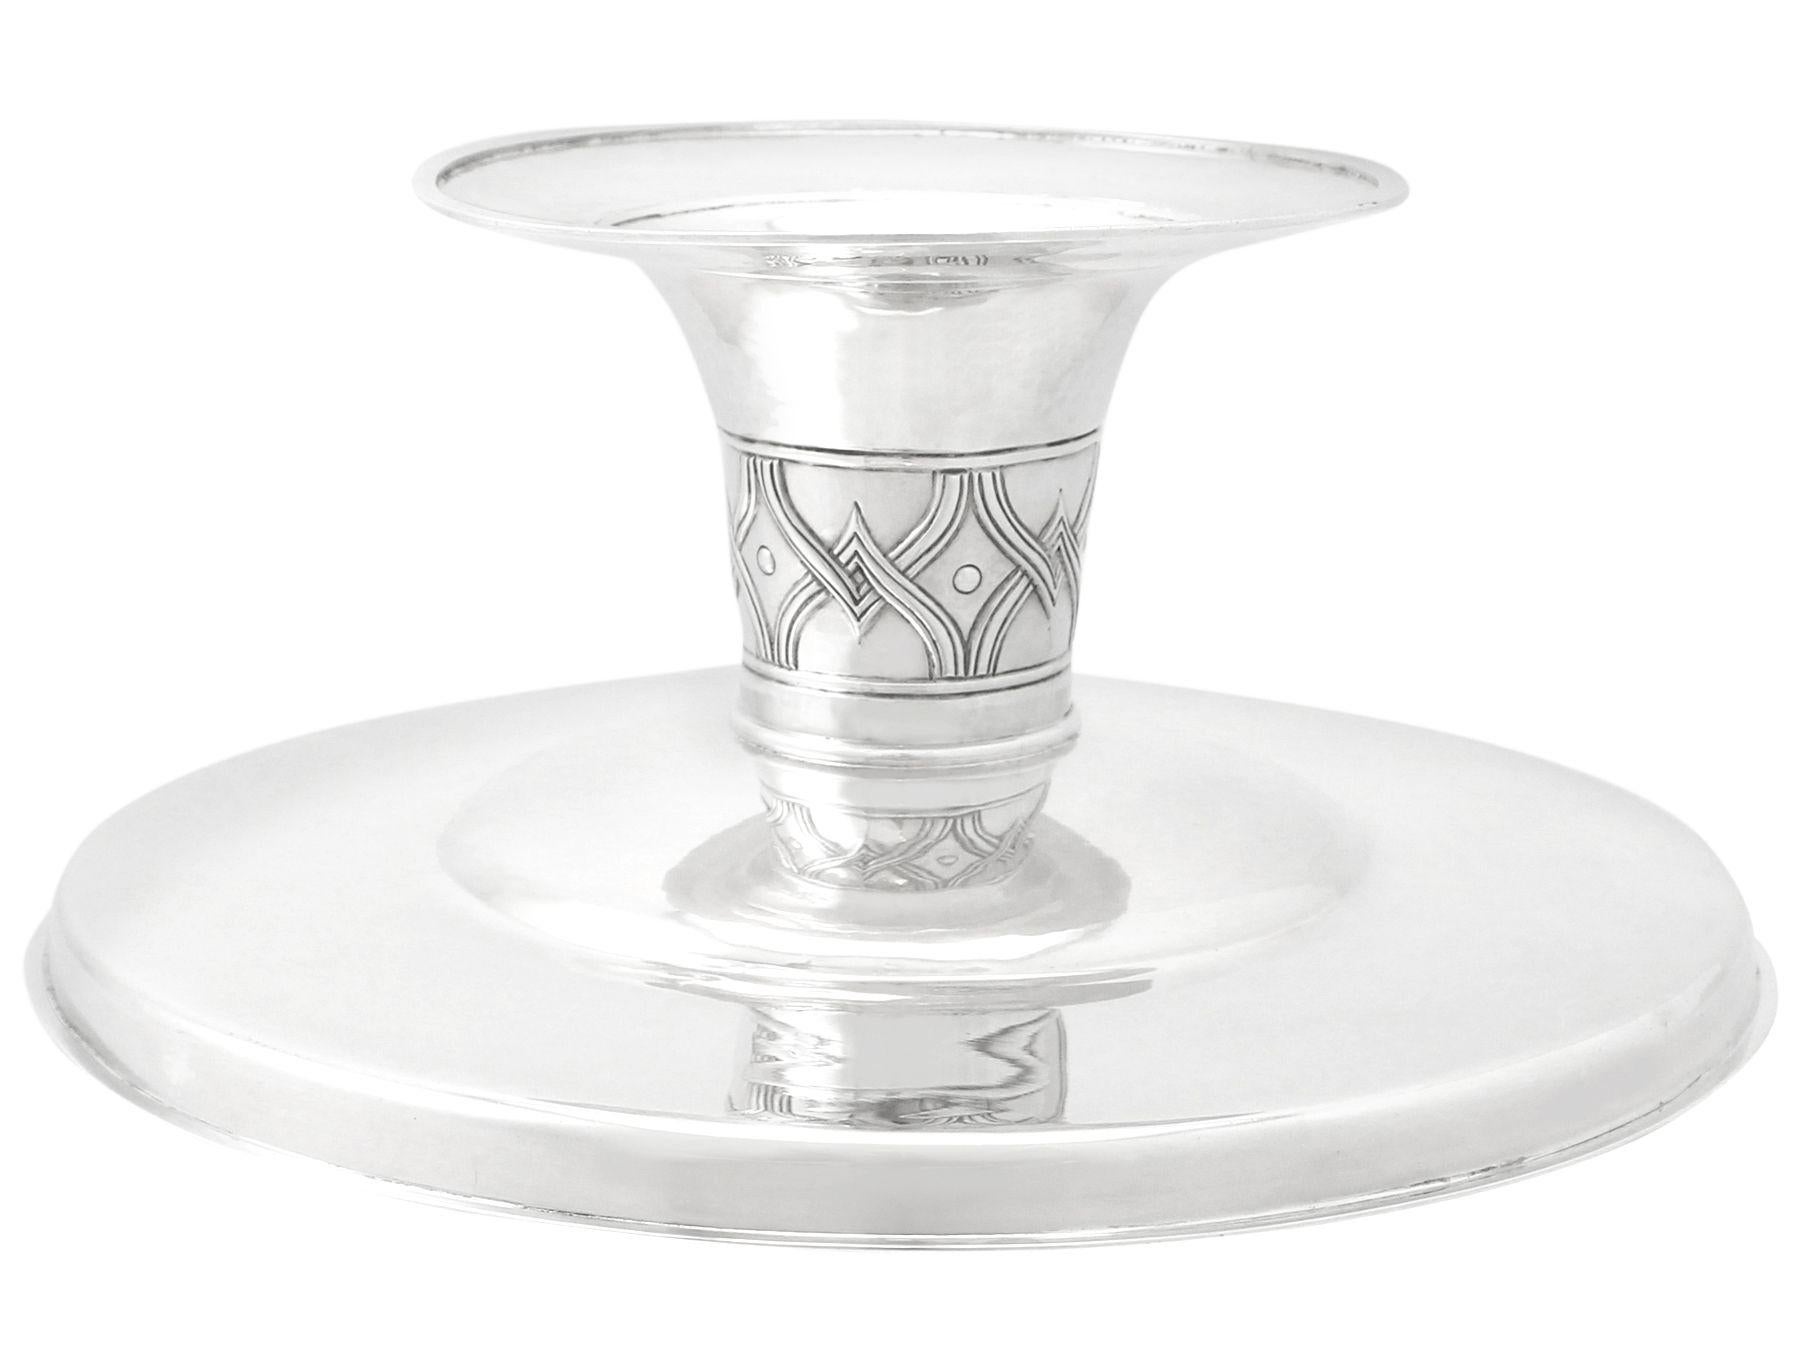 Antique Edwardian Arts & Crafts Style English Sterling Silver Tazza/Centerpiece For Sale 3